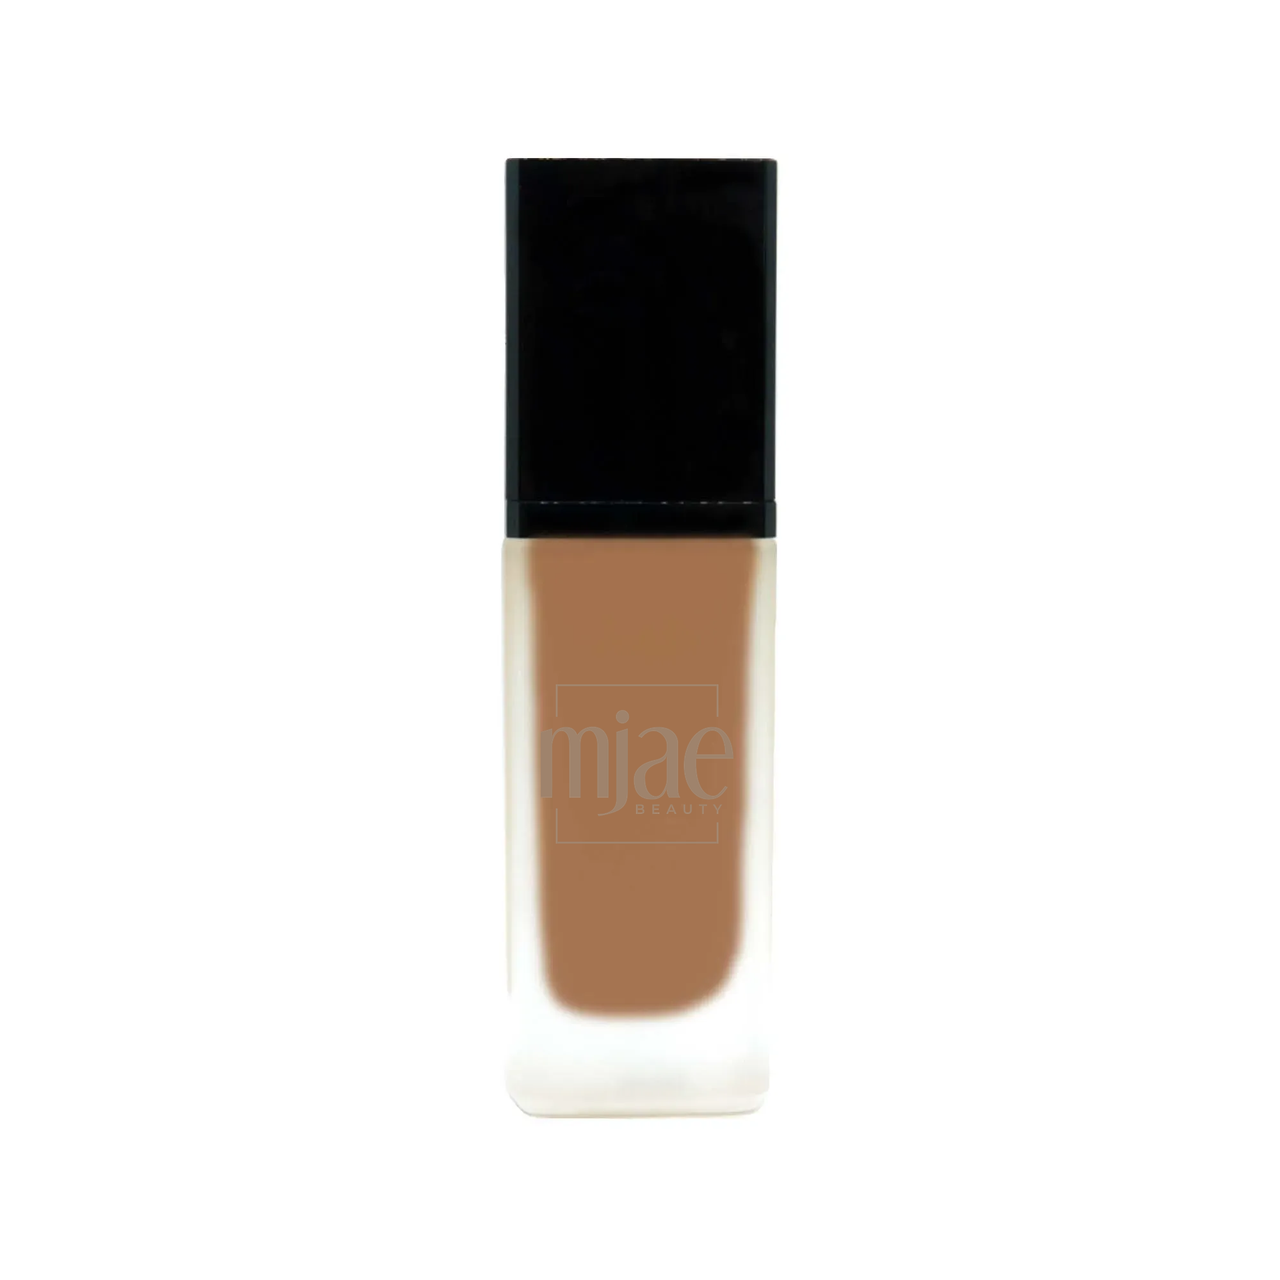 Mjae Foundation with SPF - Bronze Night - Clean Beauty